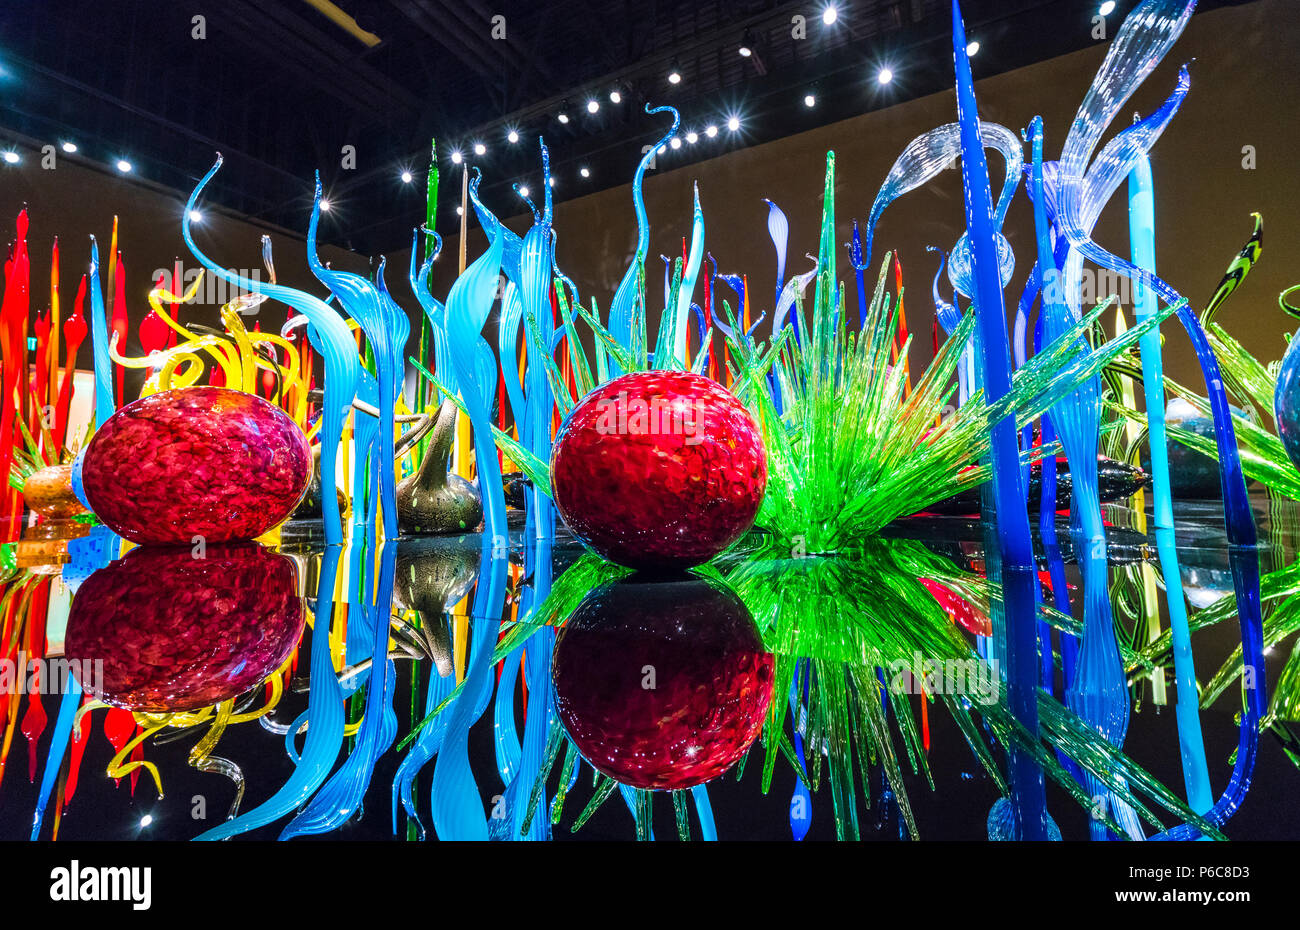 Jeg har en engelskundervisning Odysseus Tegnsætning SEATTLE - Apr 26, 2016: Blown glass in abstract shapes, Chihuly Garden and Glass  Museum, Seattle, Washington Stock Photo - Alamy